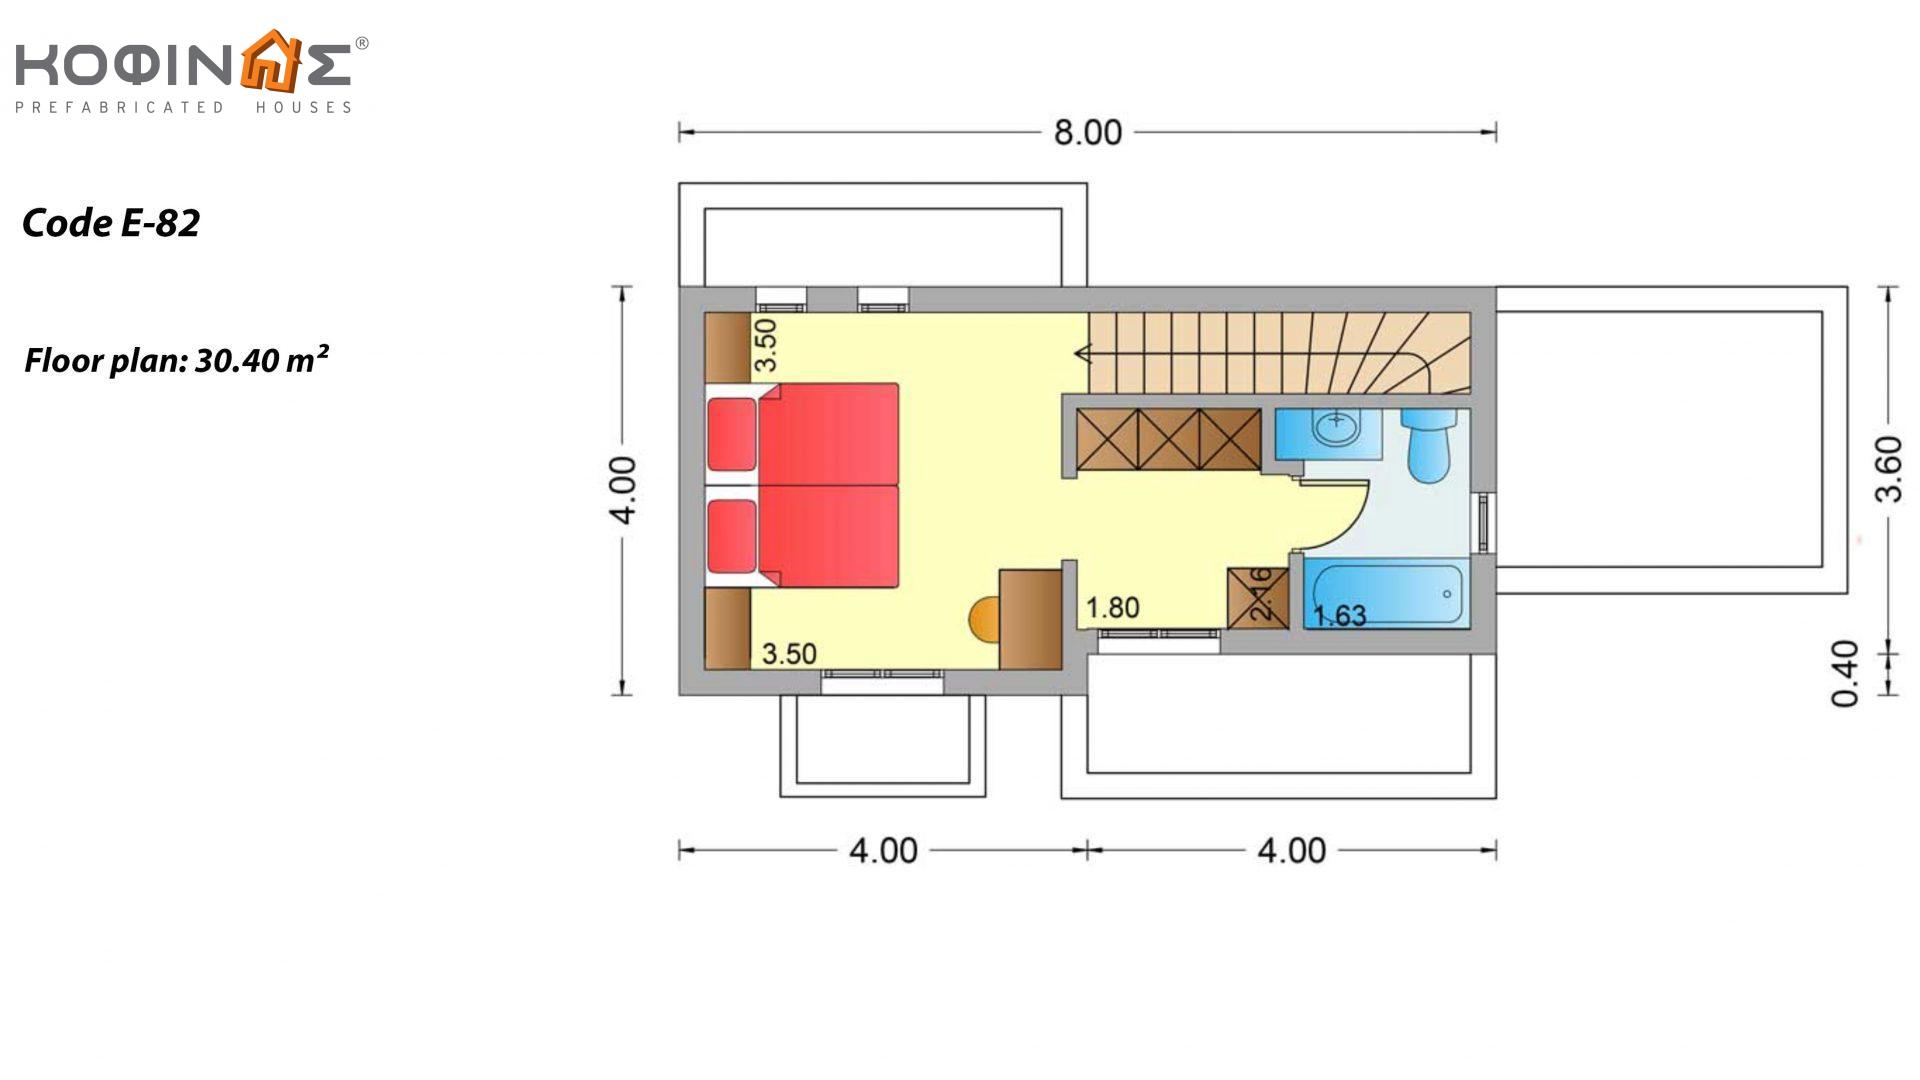 2-story house E-82, total surface of 82,30 m², roofed areas 2.00 m²